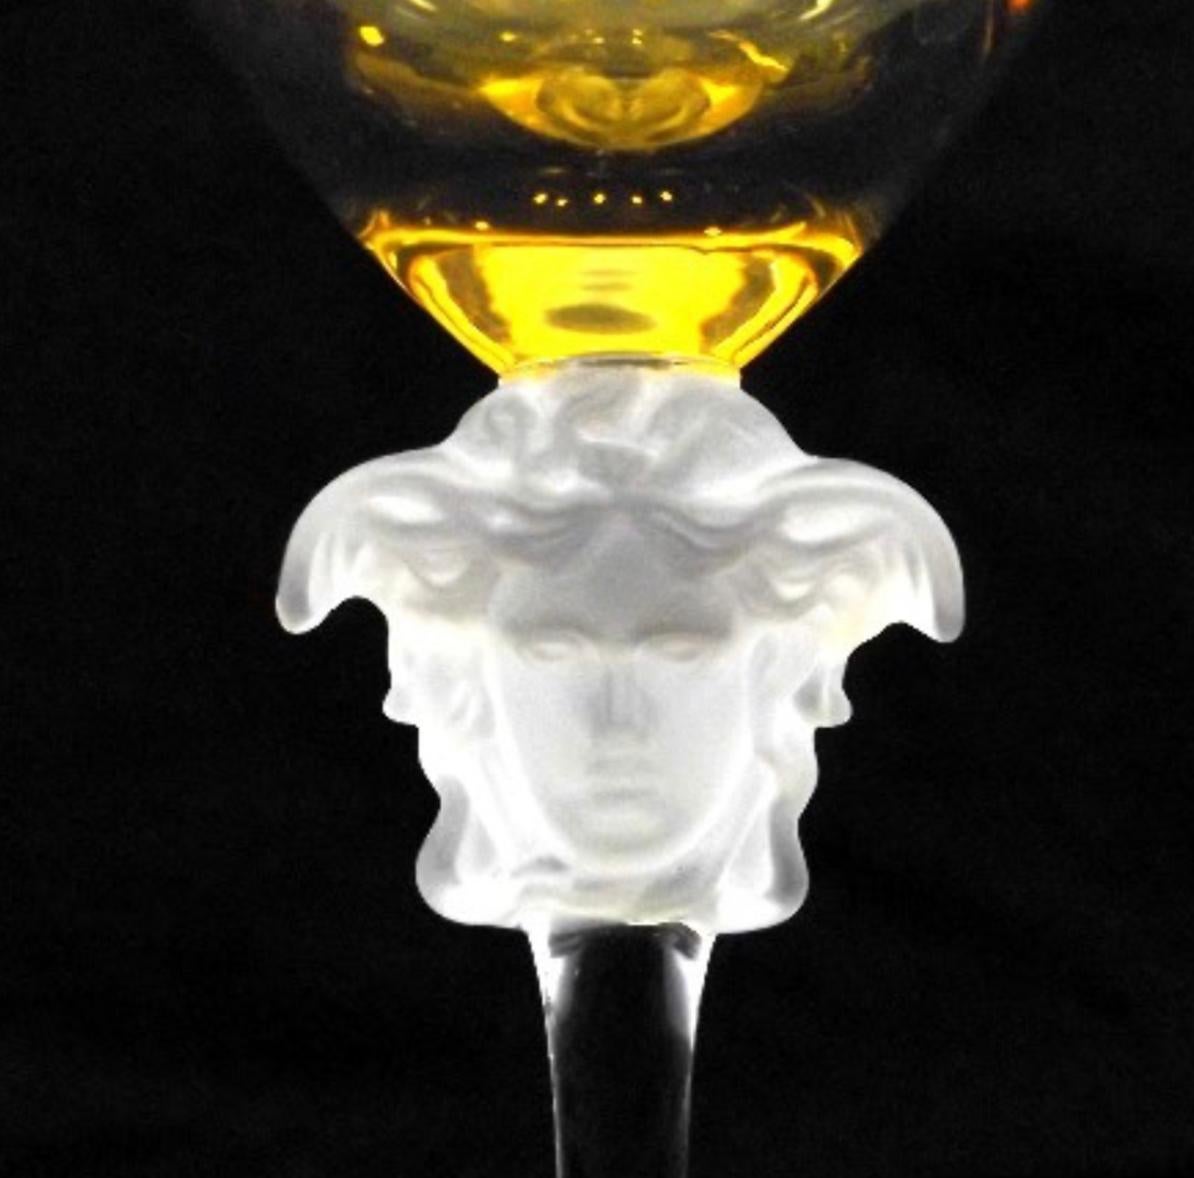 Rosenthal Versace Medusa Lumiere amber crystal wine glass, white, frosted stem. Stunning long stem crystal white wine glass manufactured by the Rosenthal Glass Company. 

The wine hock stands approximately 10 1/4